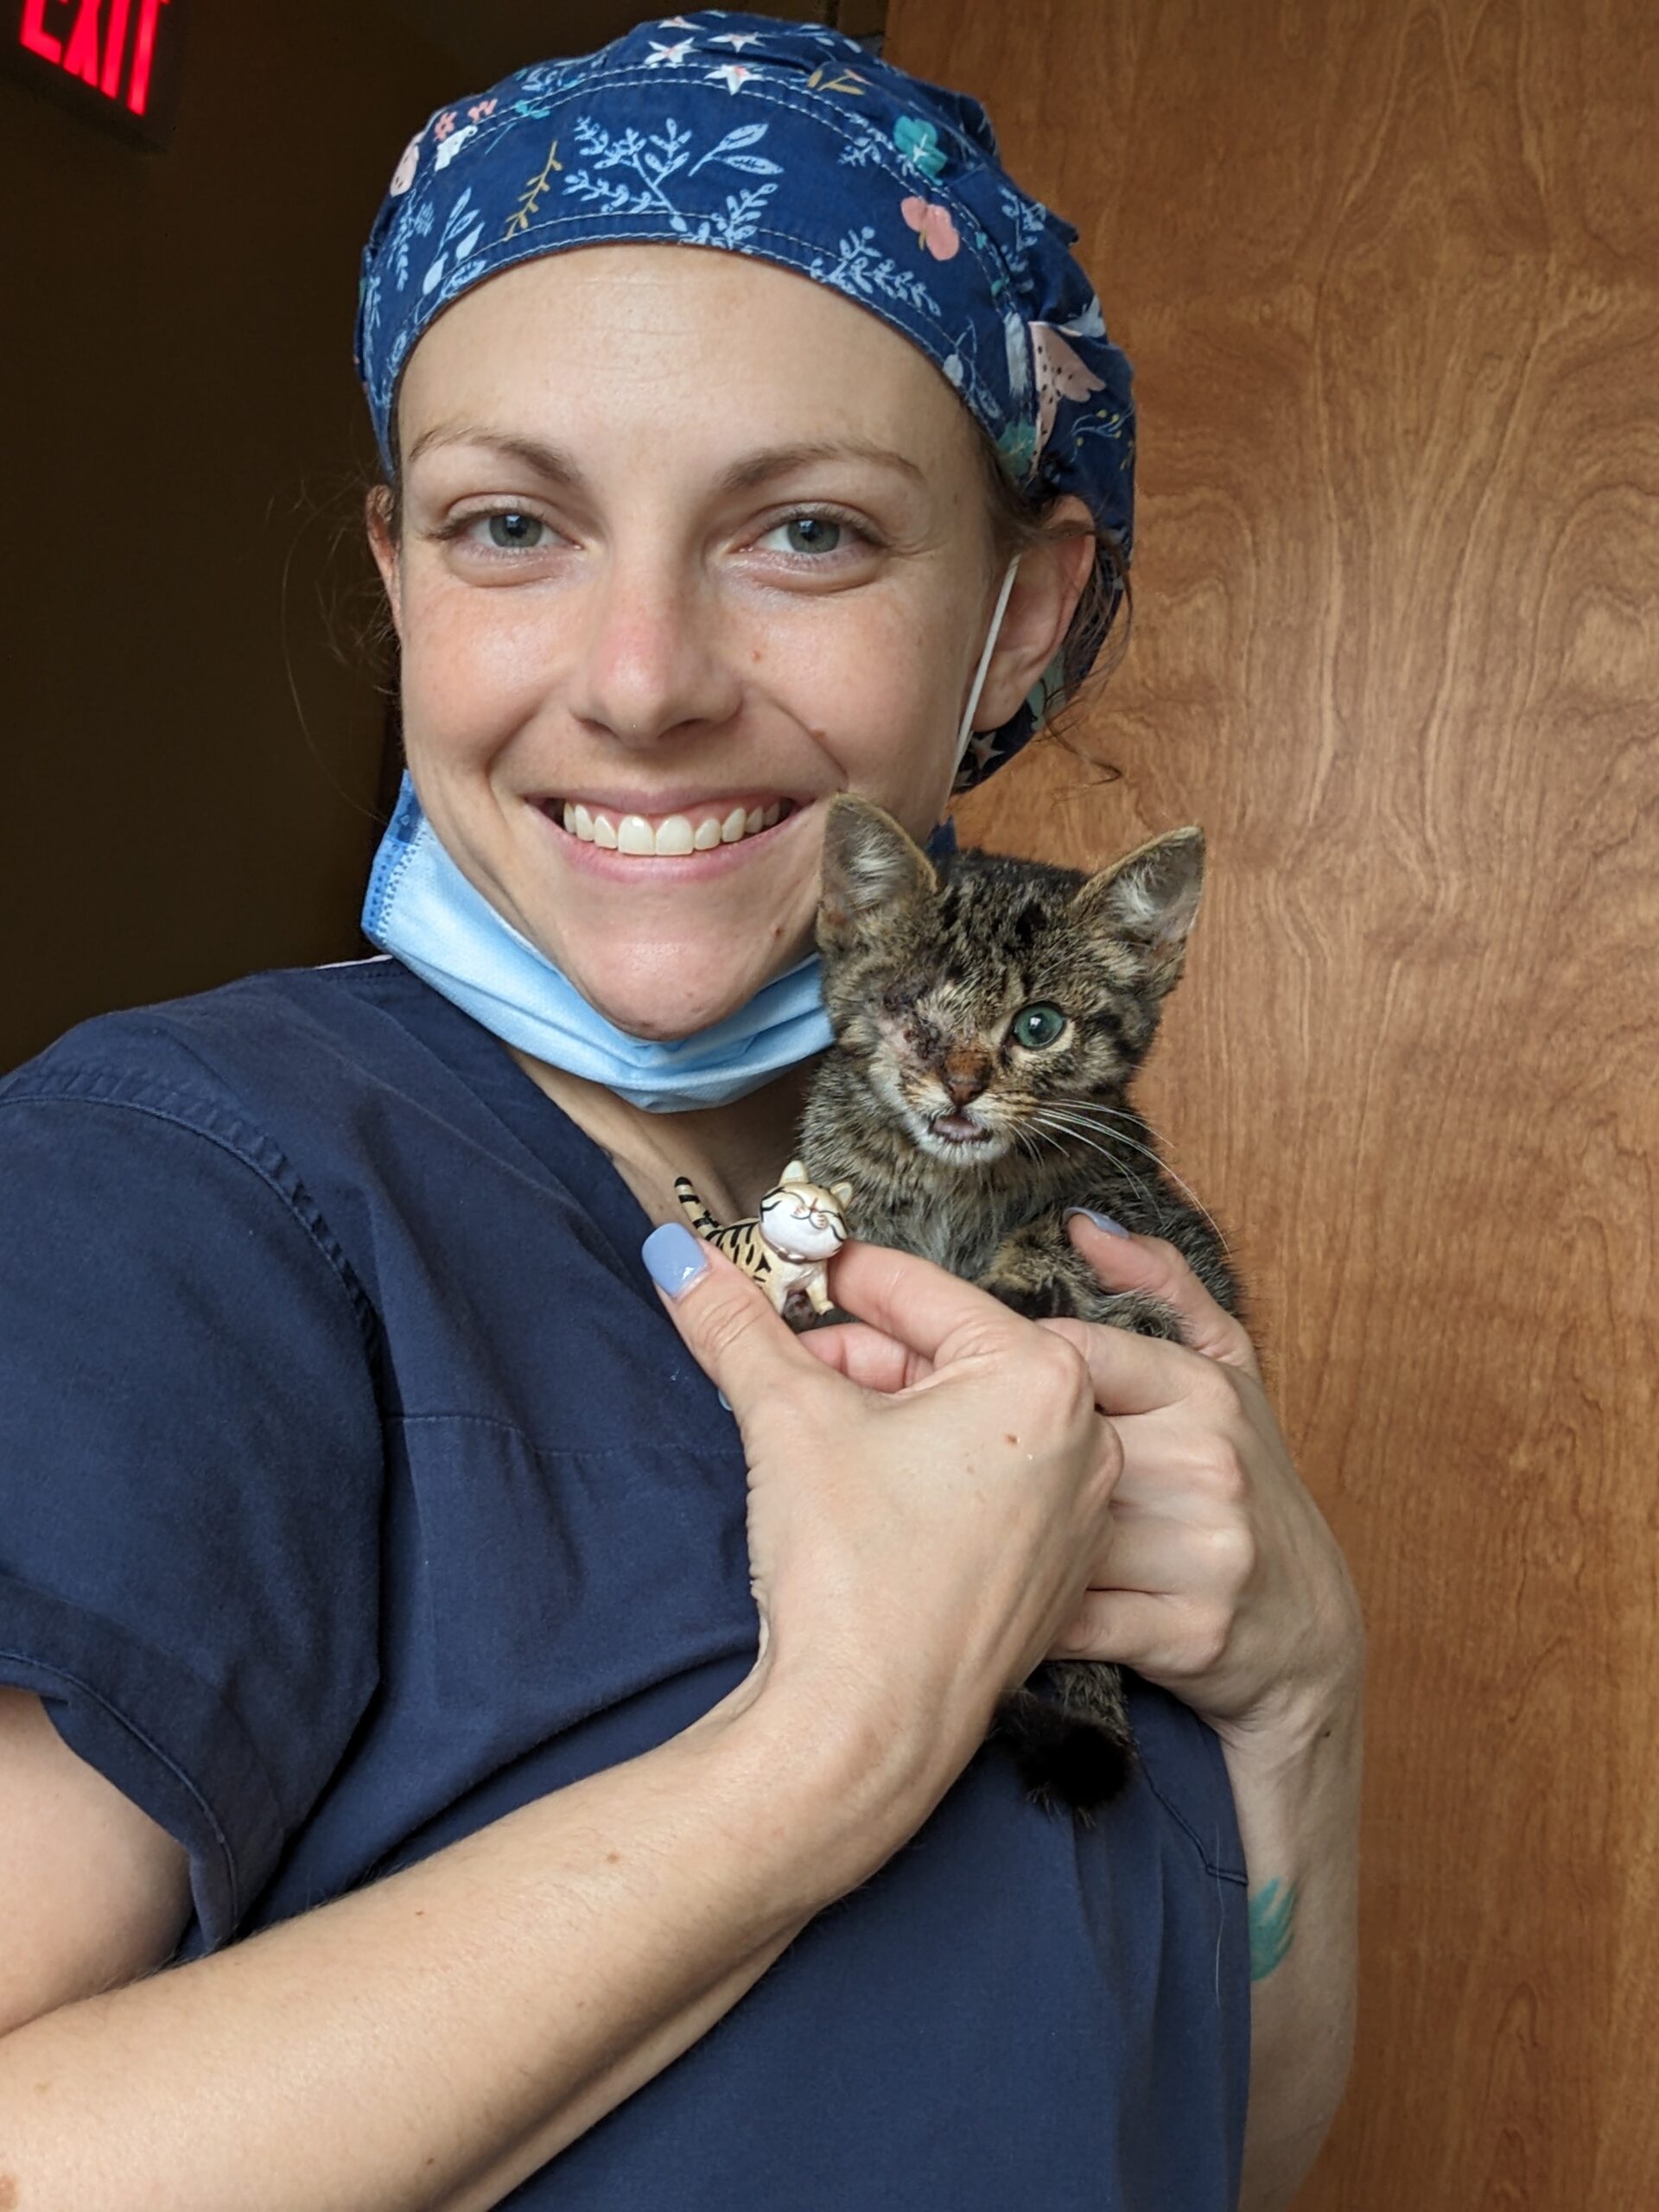 a person wearing scrubs and a blue head wrap holding a kitten